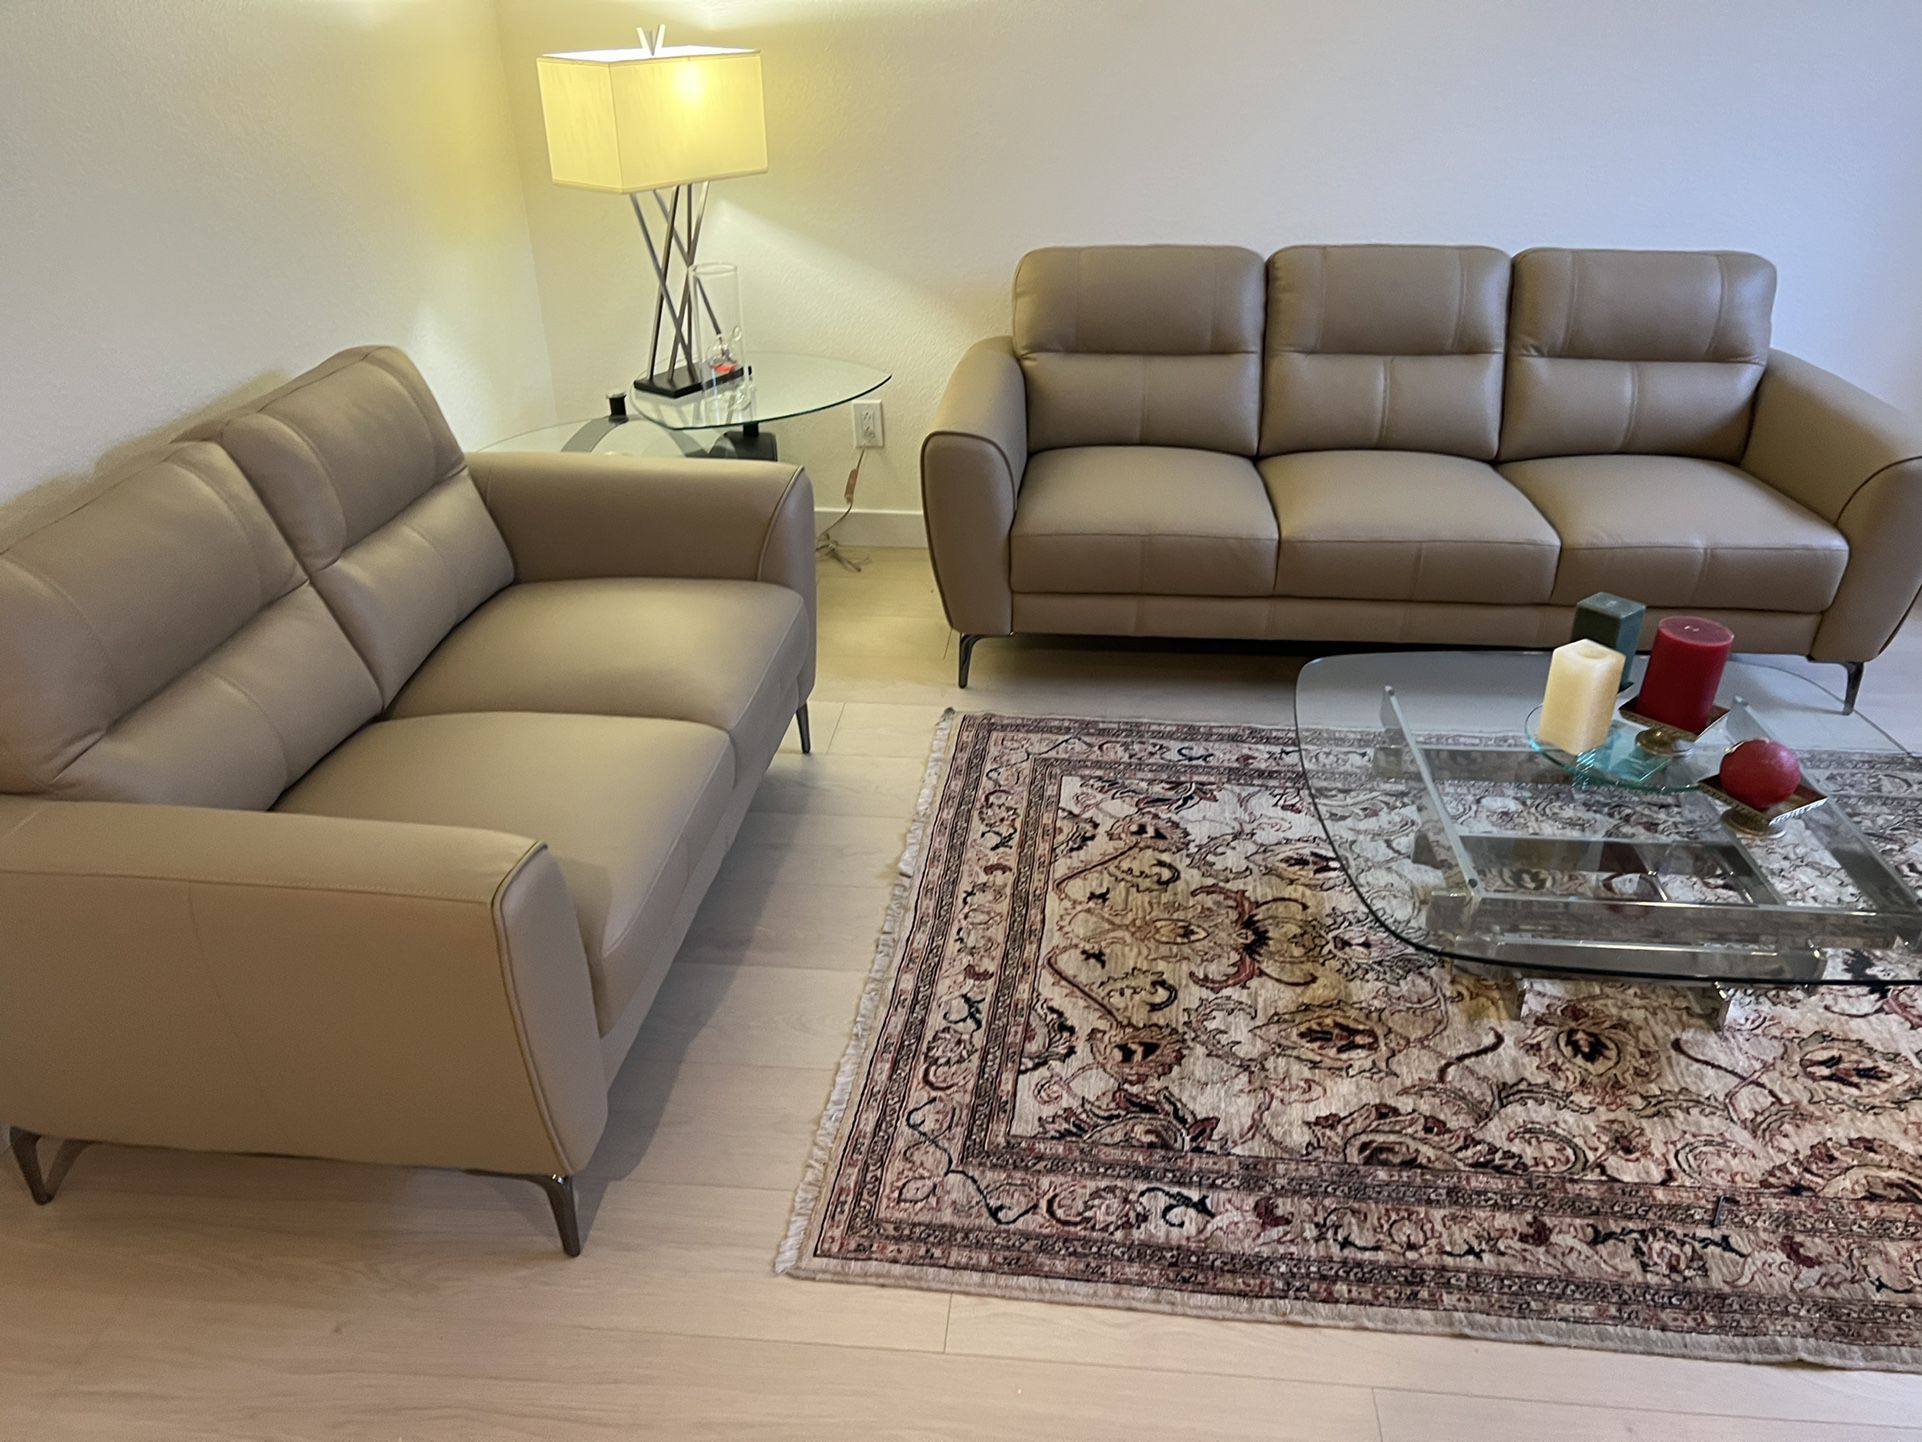 New Top Grain Leather Couch / Love Seat.  Beige Or Grey.  60”x37”x34”H; 82”x37”x34”H.  Free Delivery!